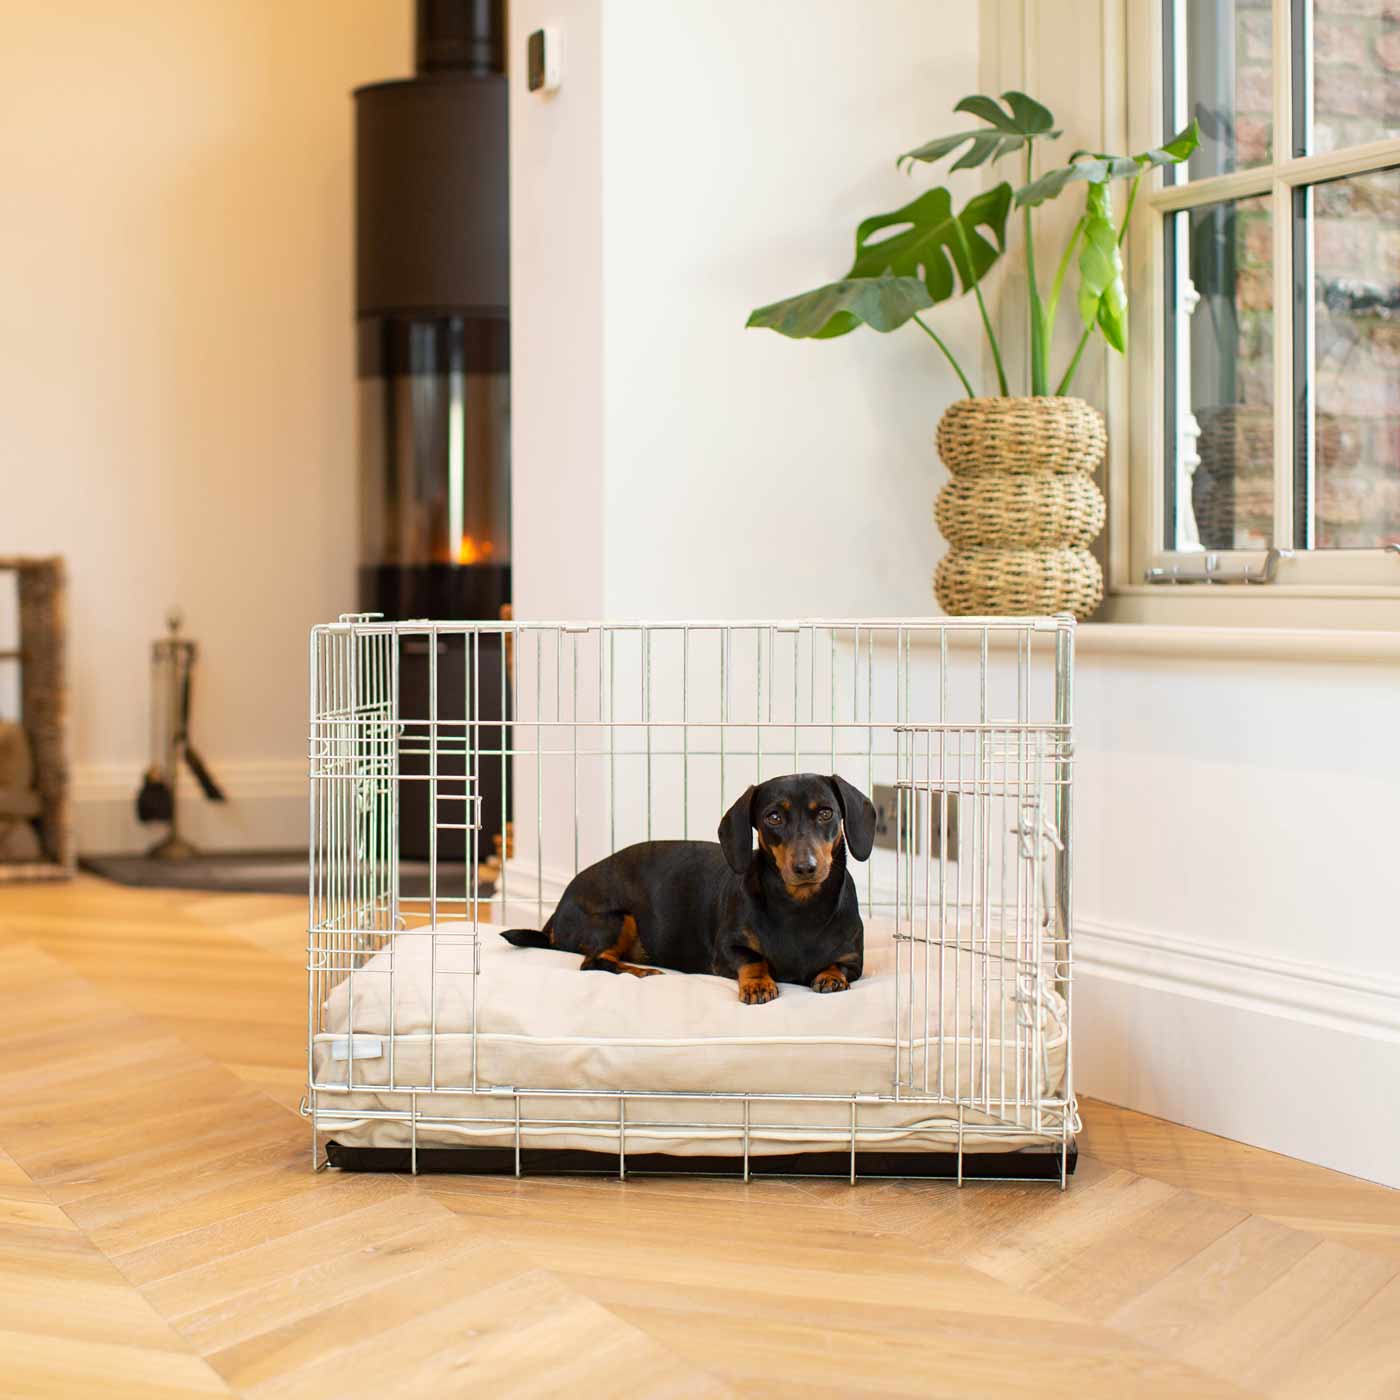 Luxury Dog Crate Cushion, Savanna Oatmeal Crate Cushion The Perfect Dog Crate Accessory, Available To Personalise Now at Lords & Labradors